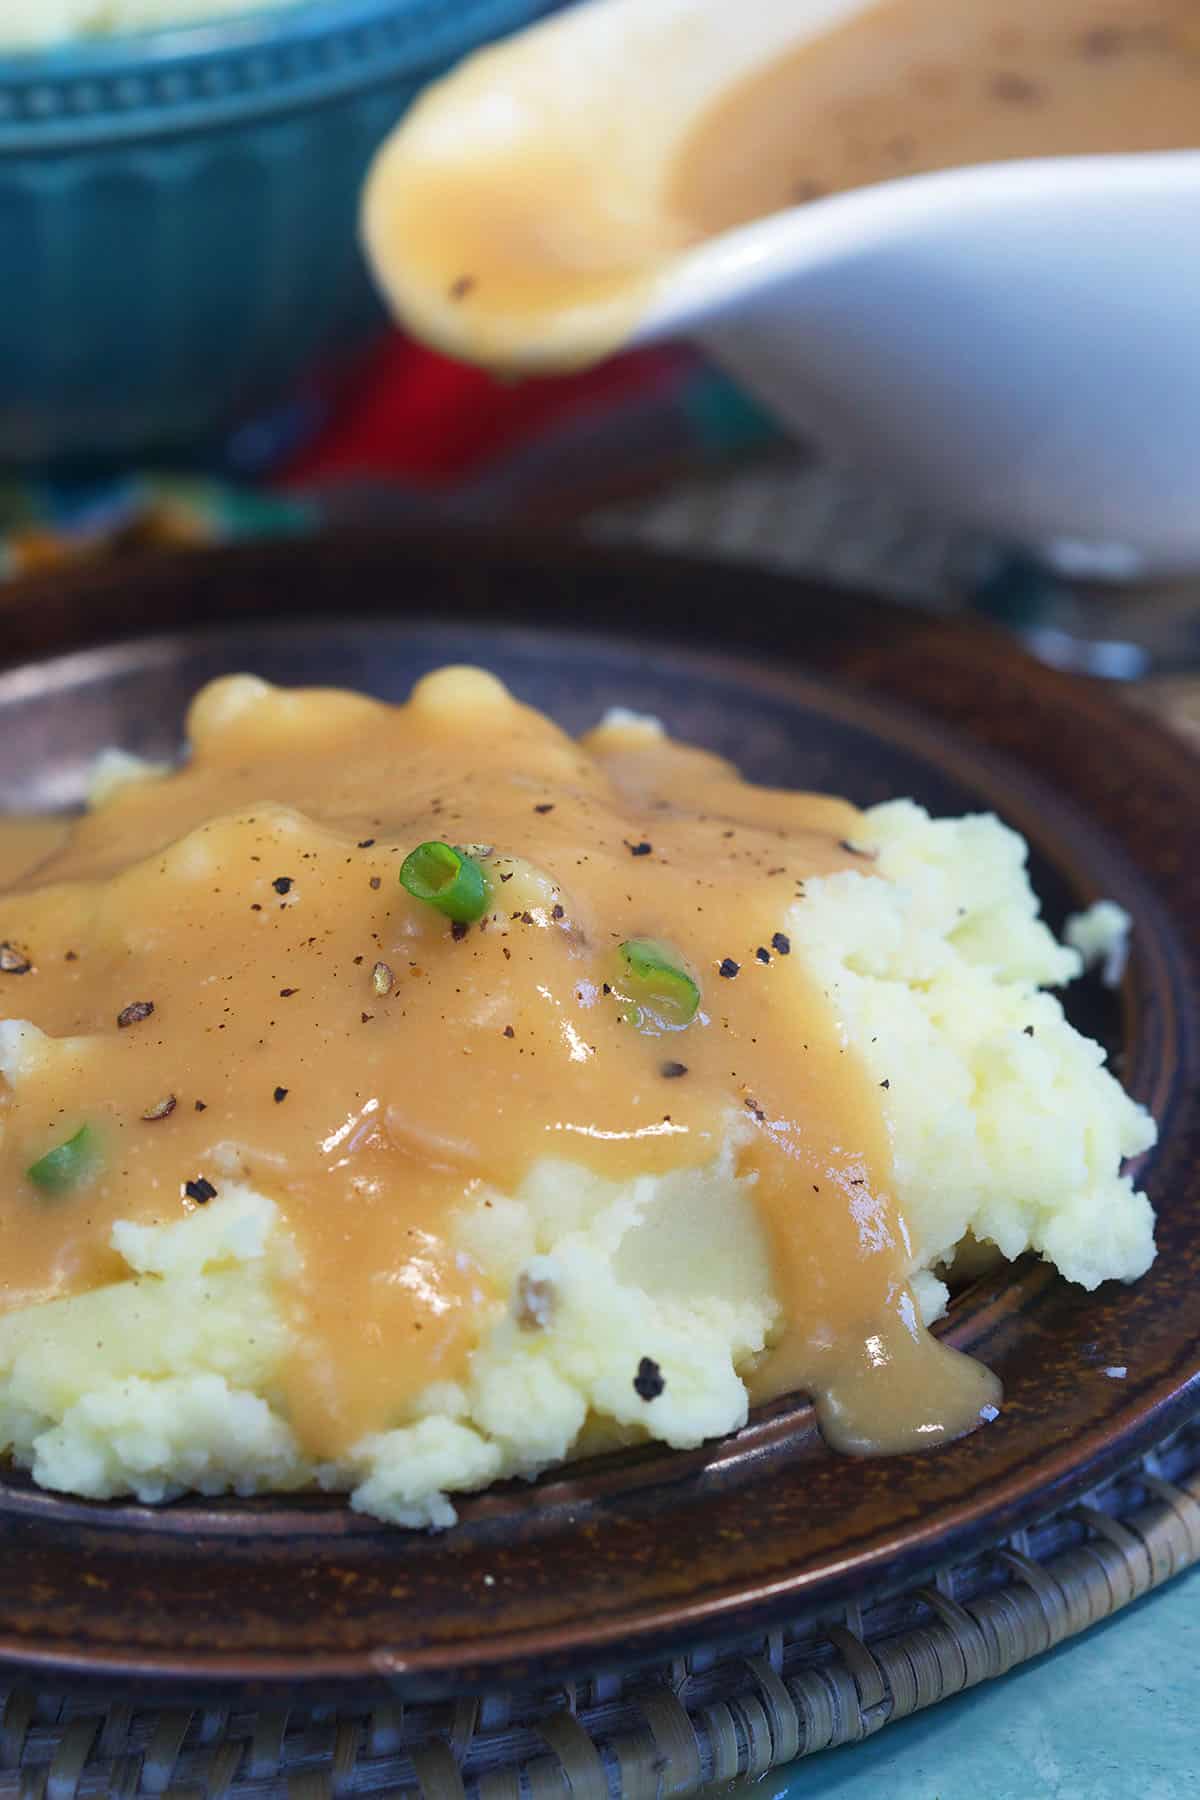 A serving of mashed potatoes with gravy is presented on a brown plate.